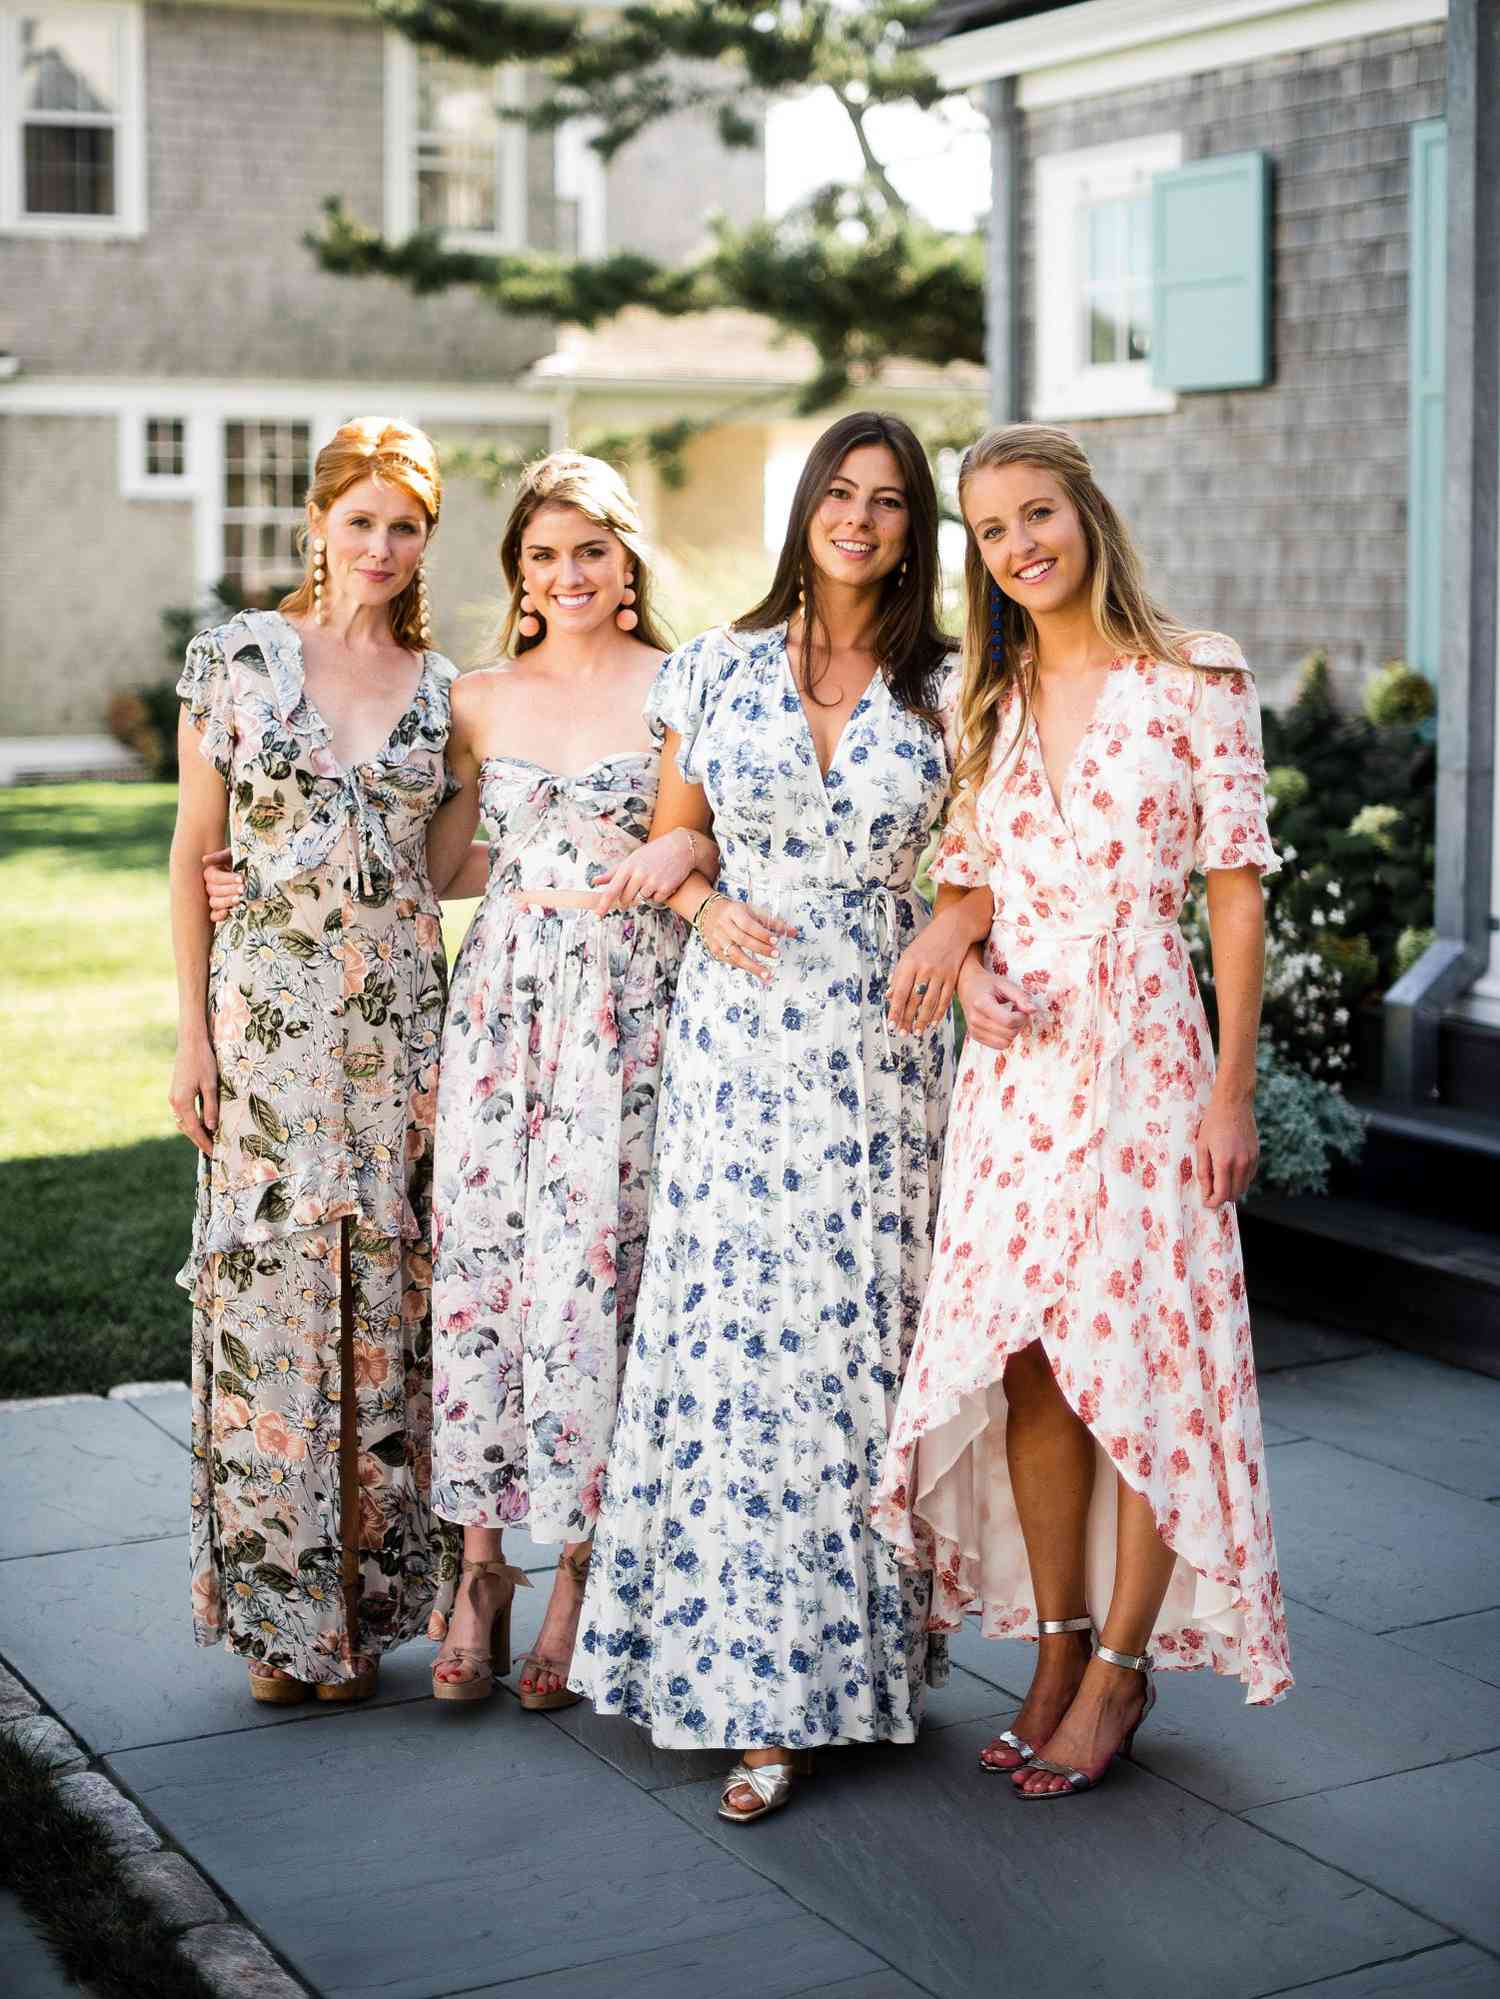 chic bridesmaids long floral dresses with earrings